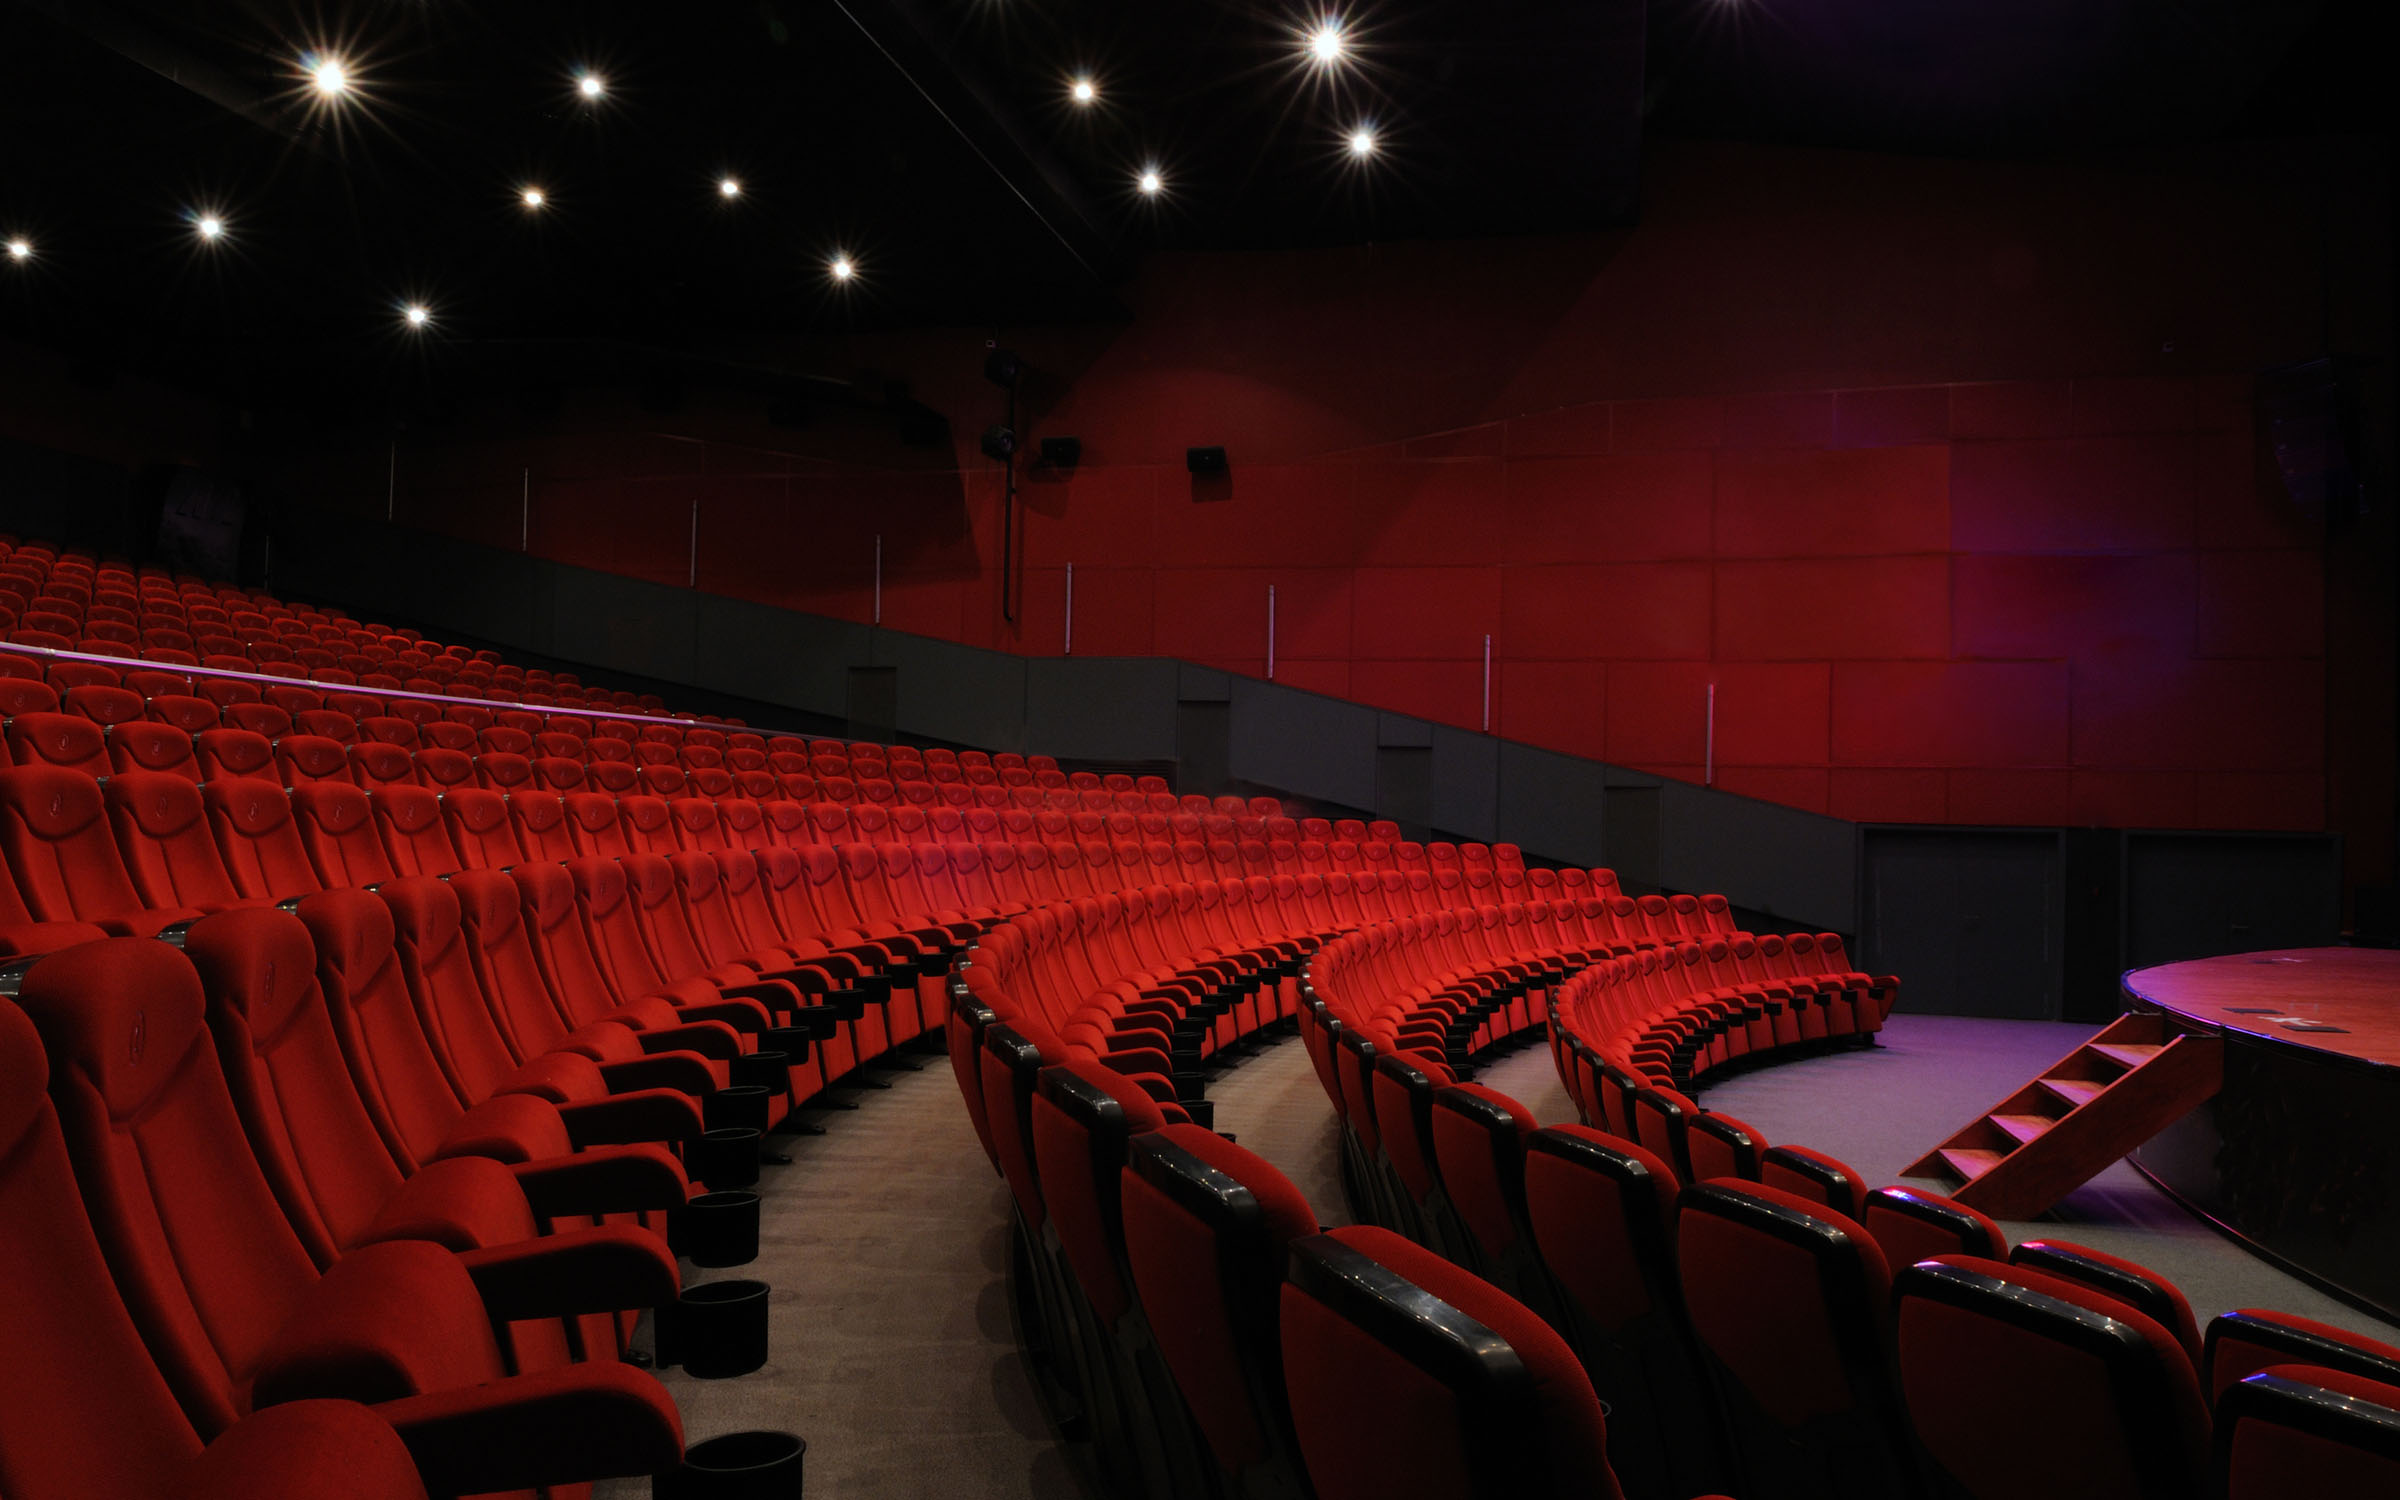 Large cinema with red chairs in a curved circular layout.